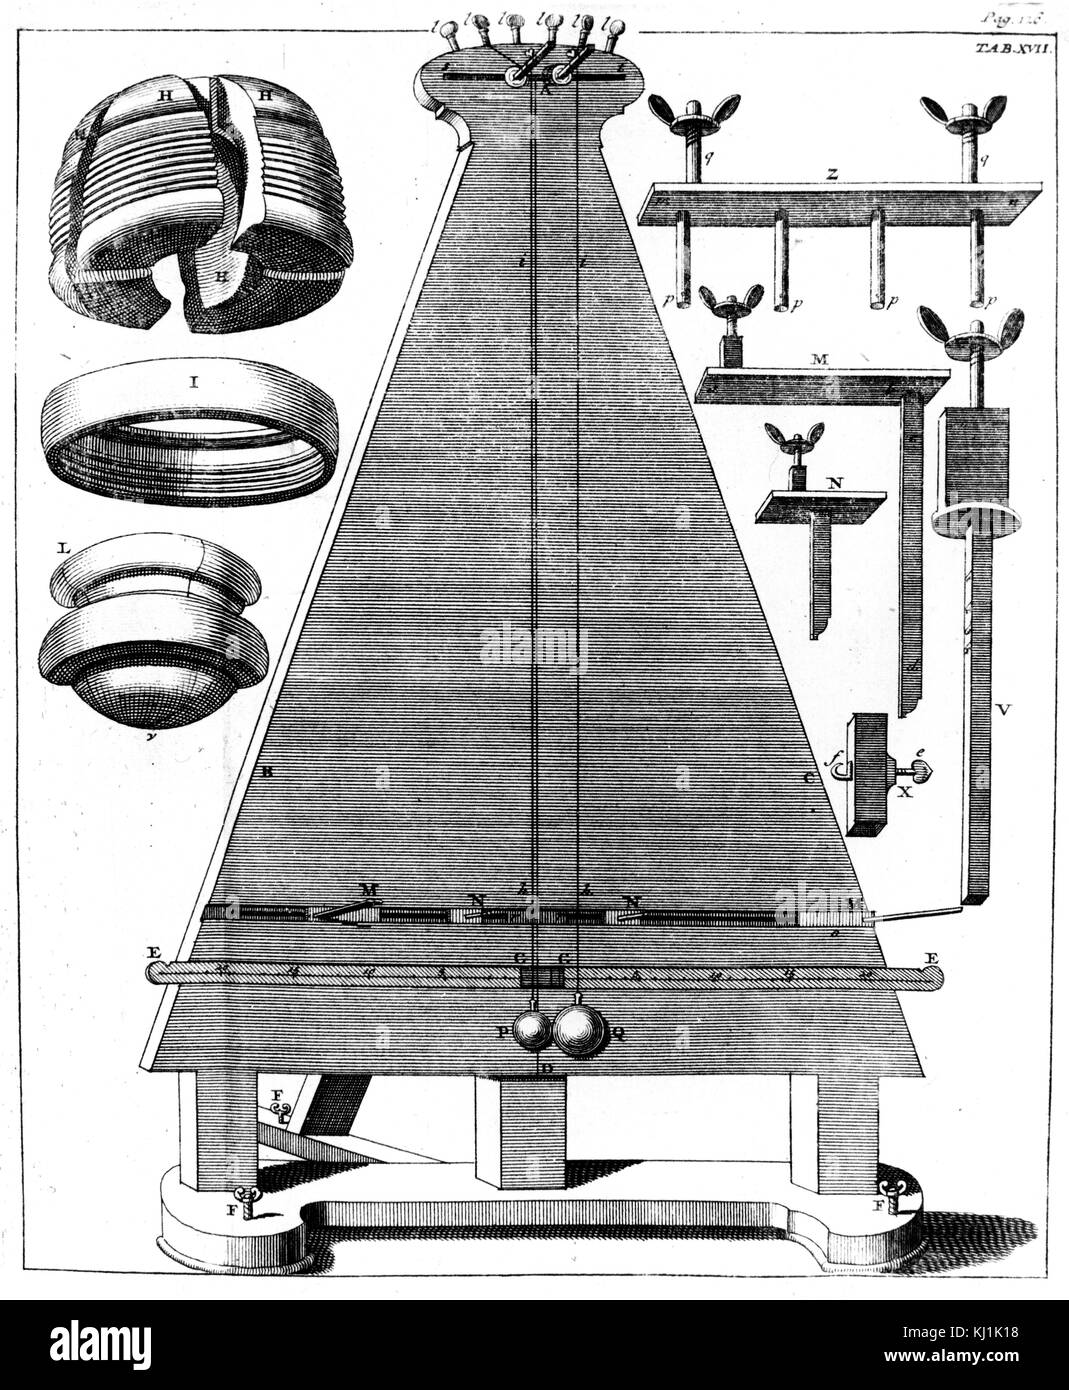 Engraving depicting an experiment used to investigate the inertia of bodies using two suspended weights whose movements could be accurately measure, and allowing one to collide with the other, which was stationary. Dated 18th Century Stock Photo